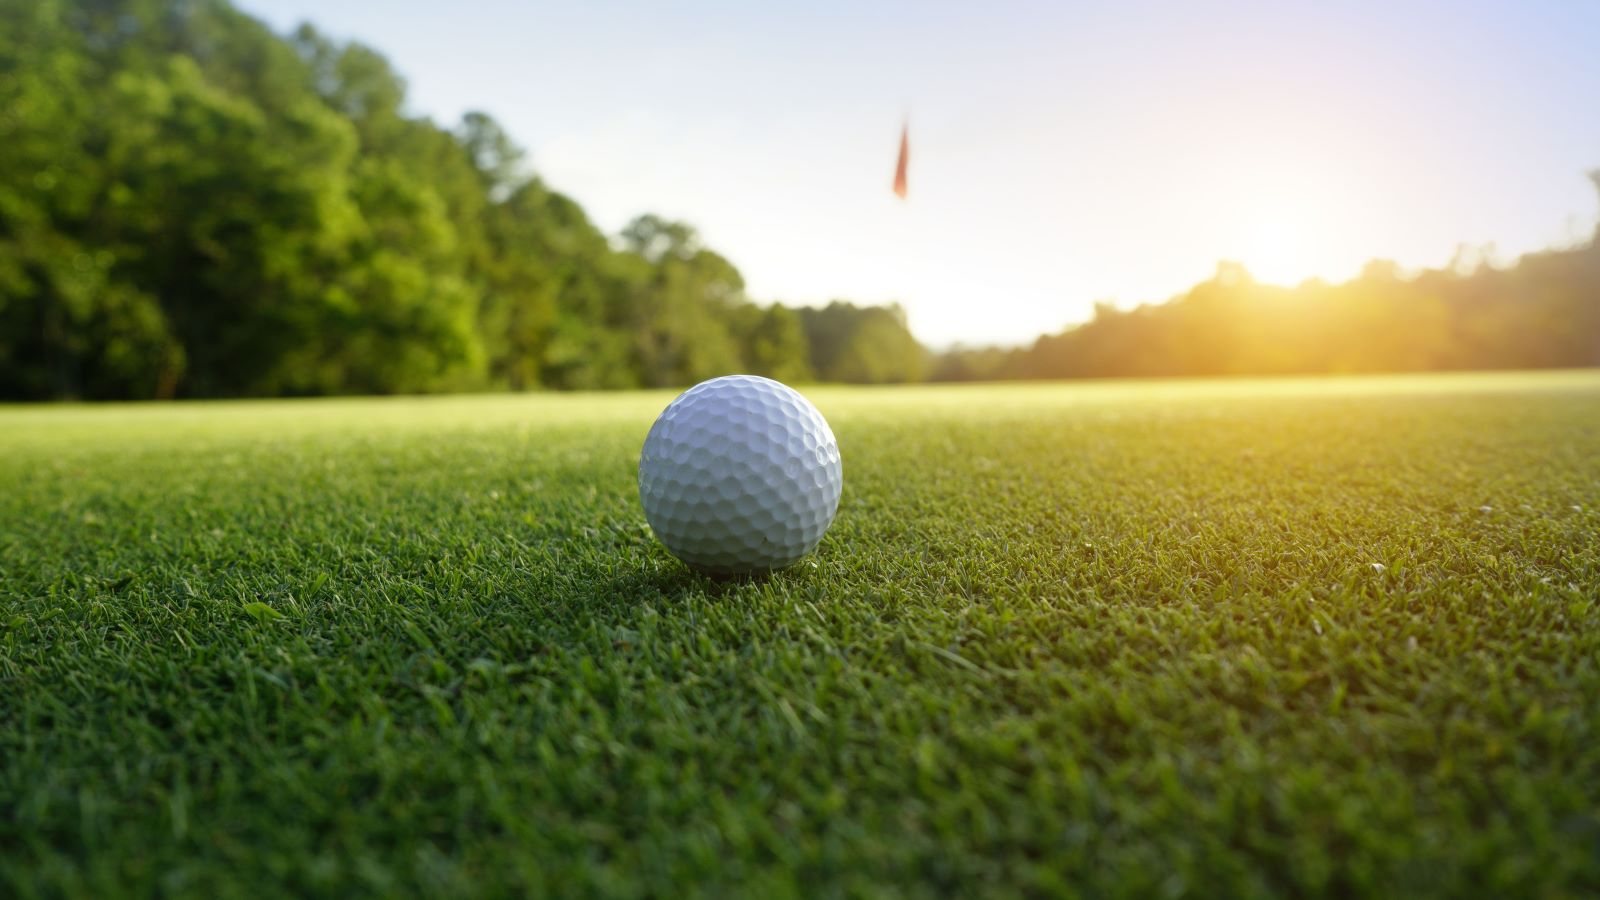 With golf season in full swing, we asked an expert to explain common hip injuries from golf and how to get some relief.